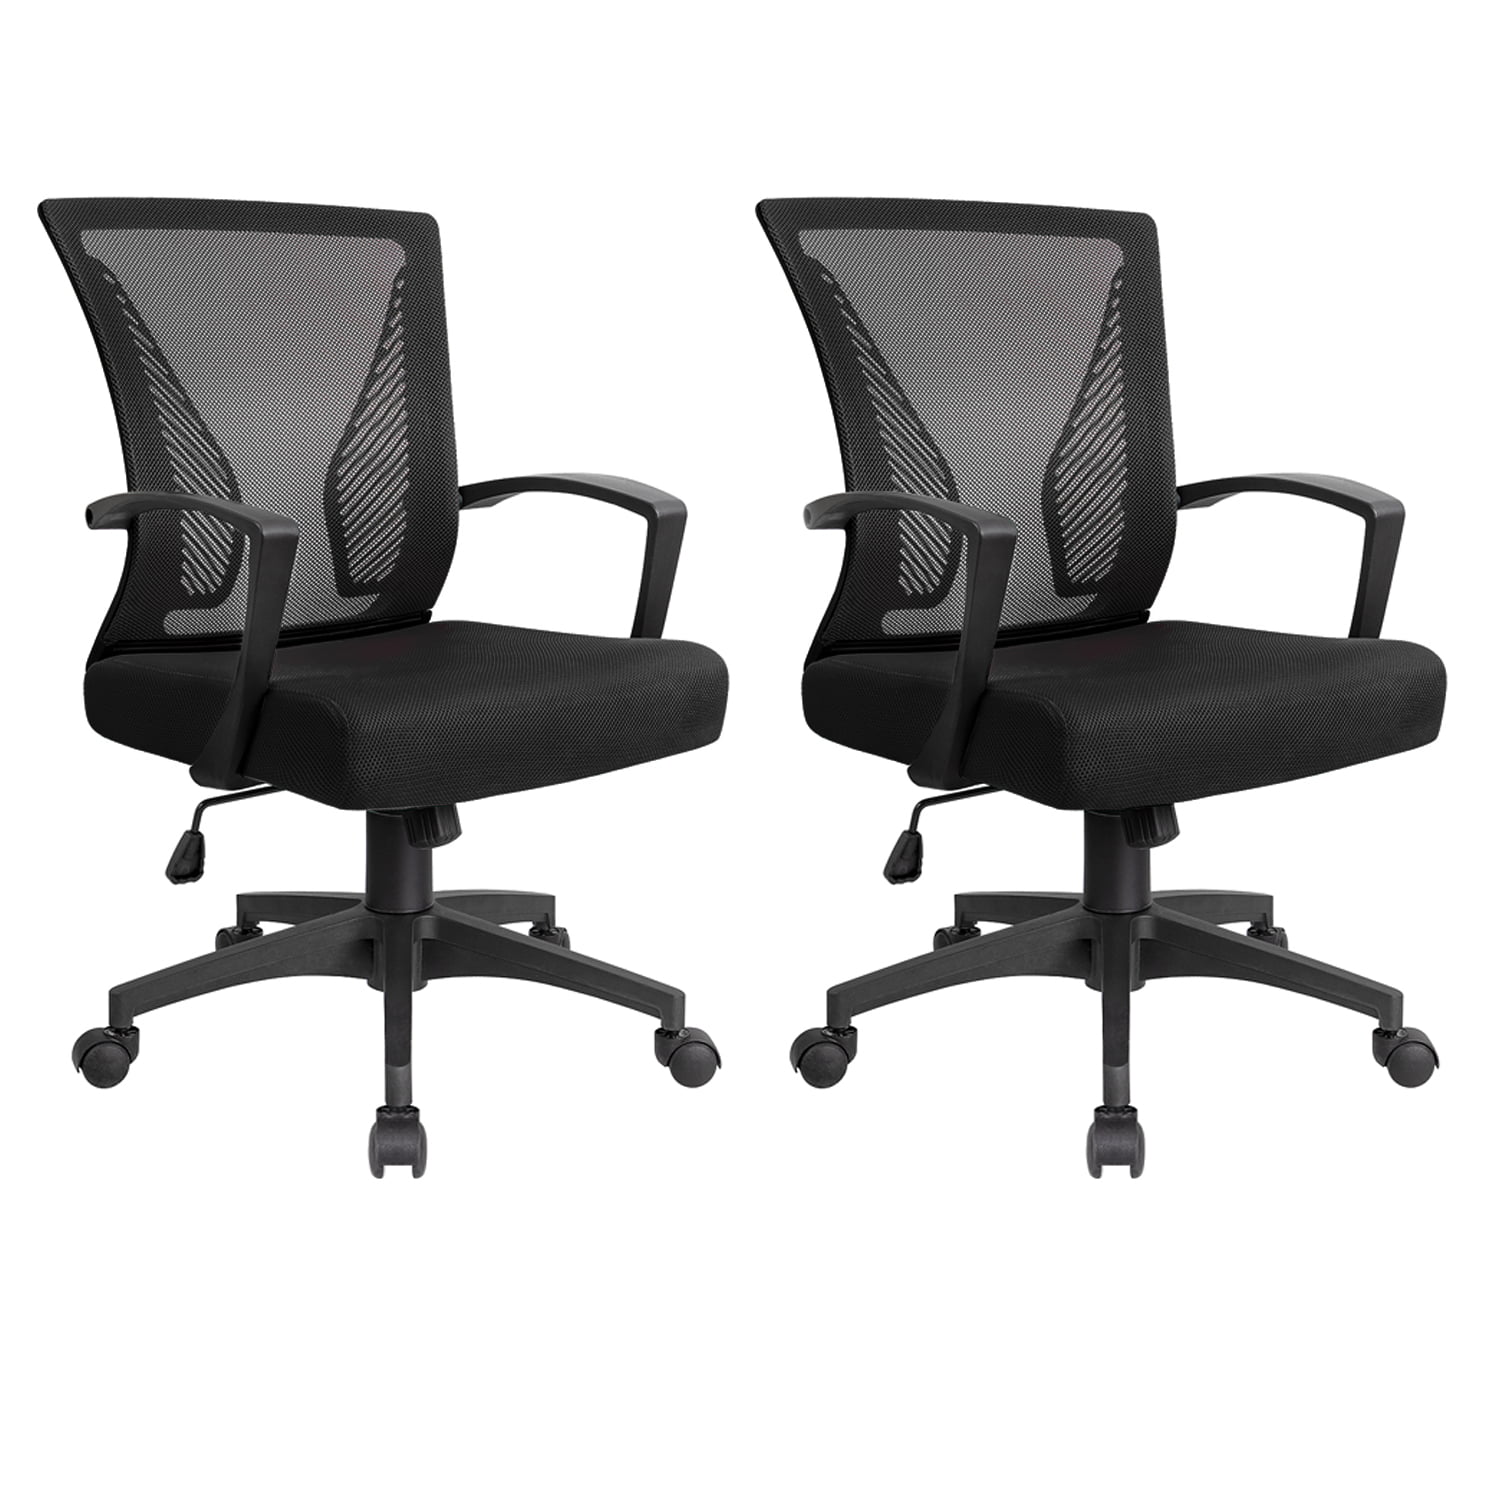 Walnew Office Chair Two Pieces of Mid Back Swivel Lumbar Support Desk